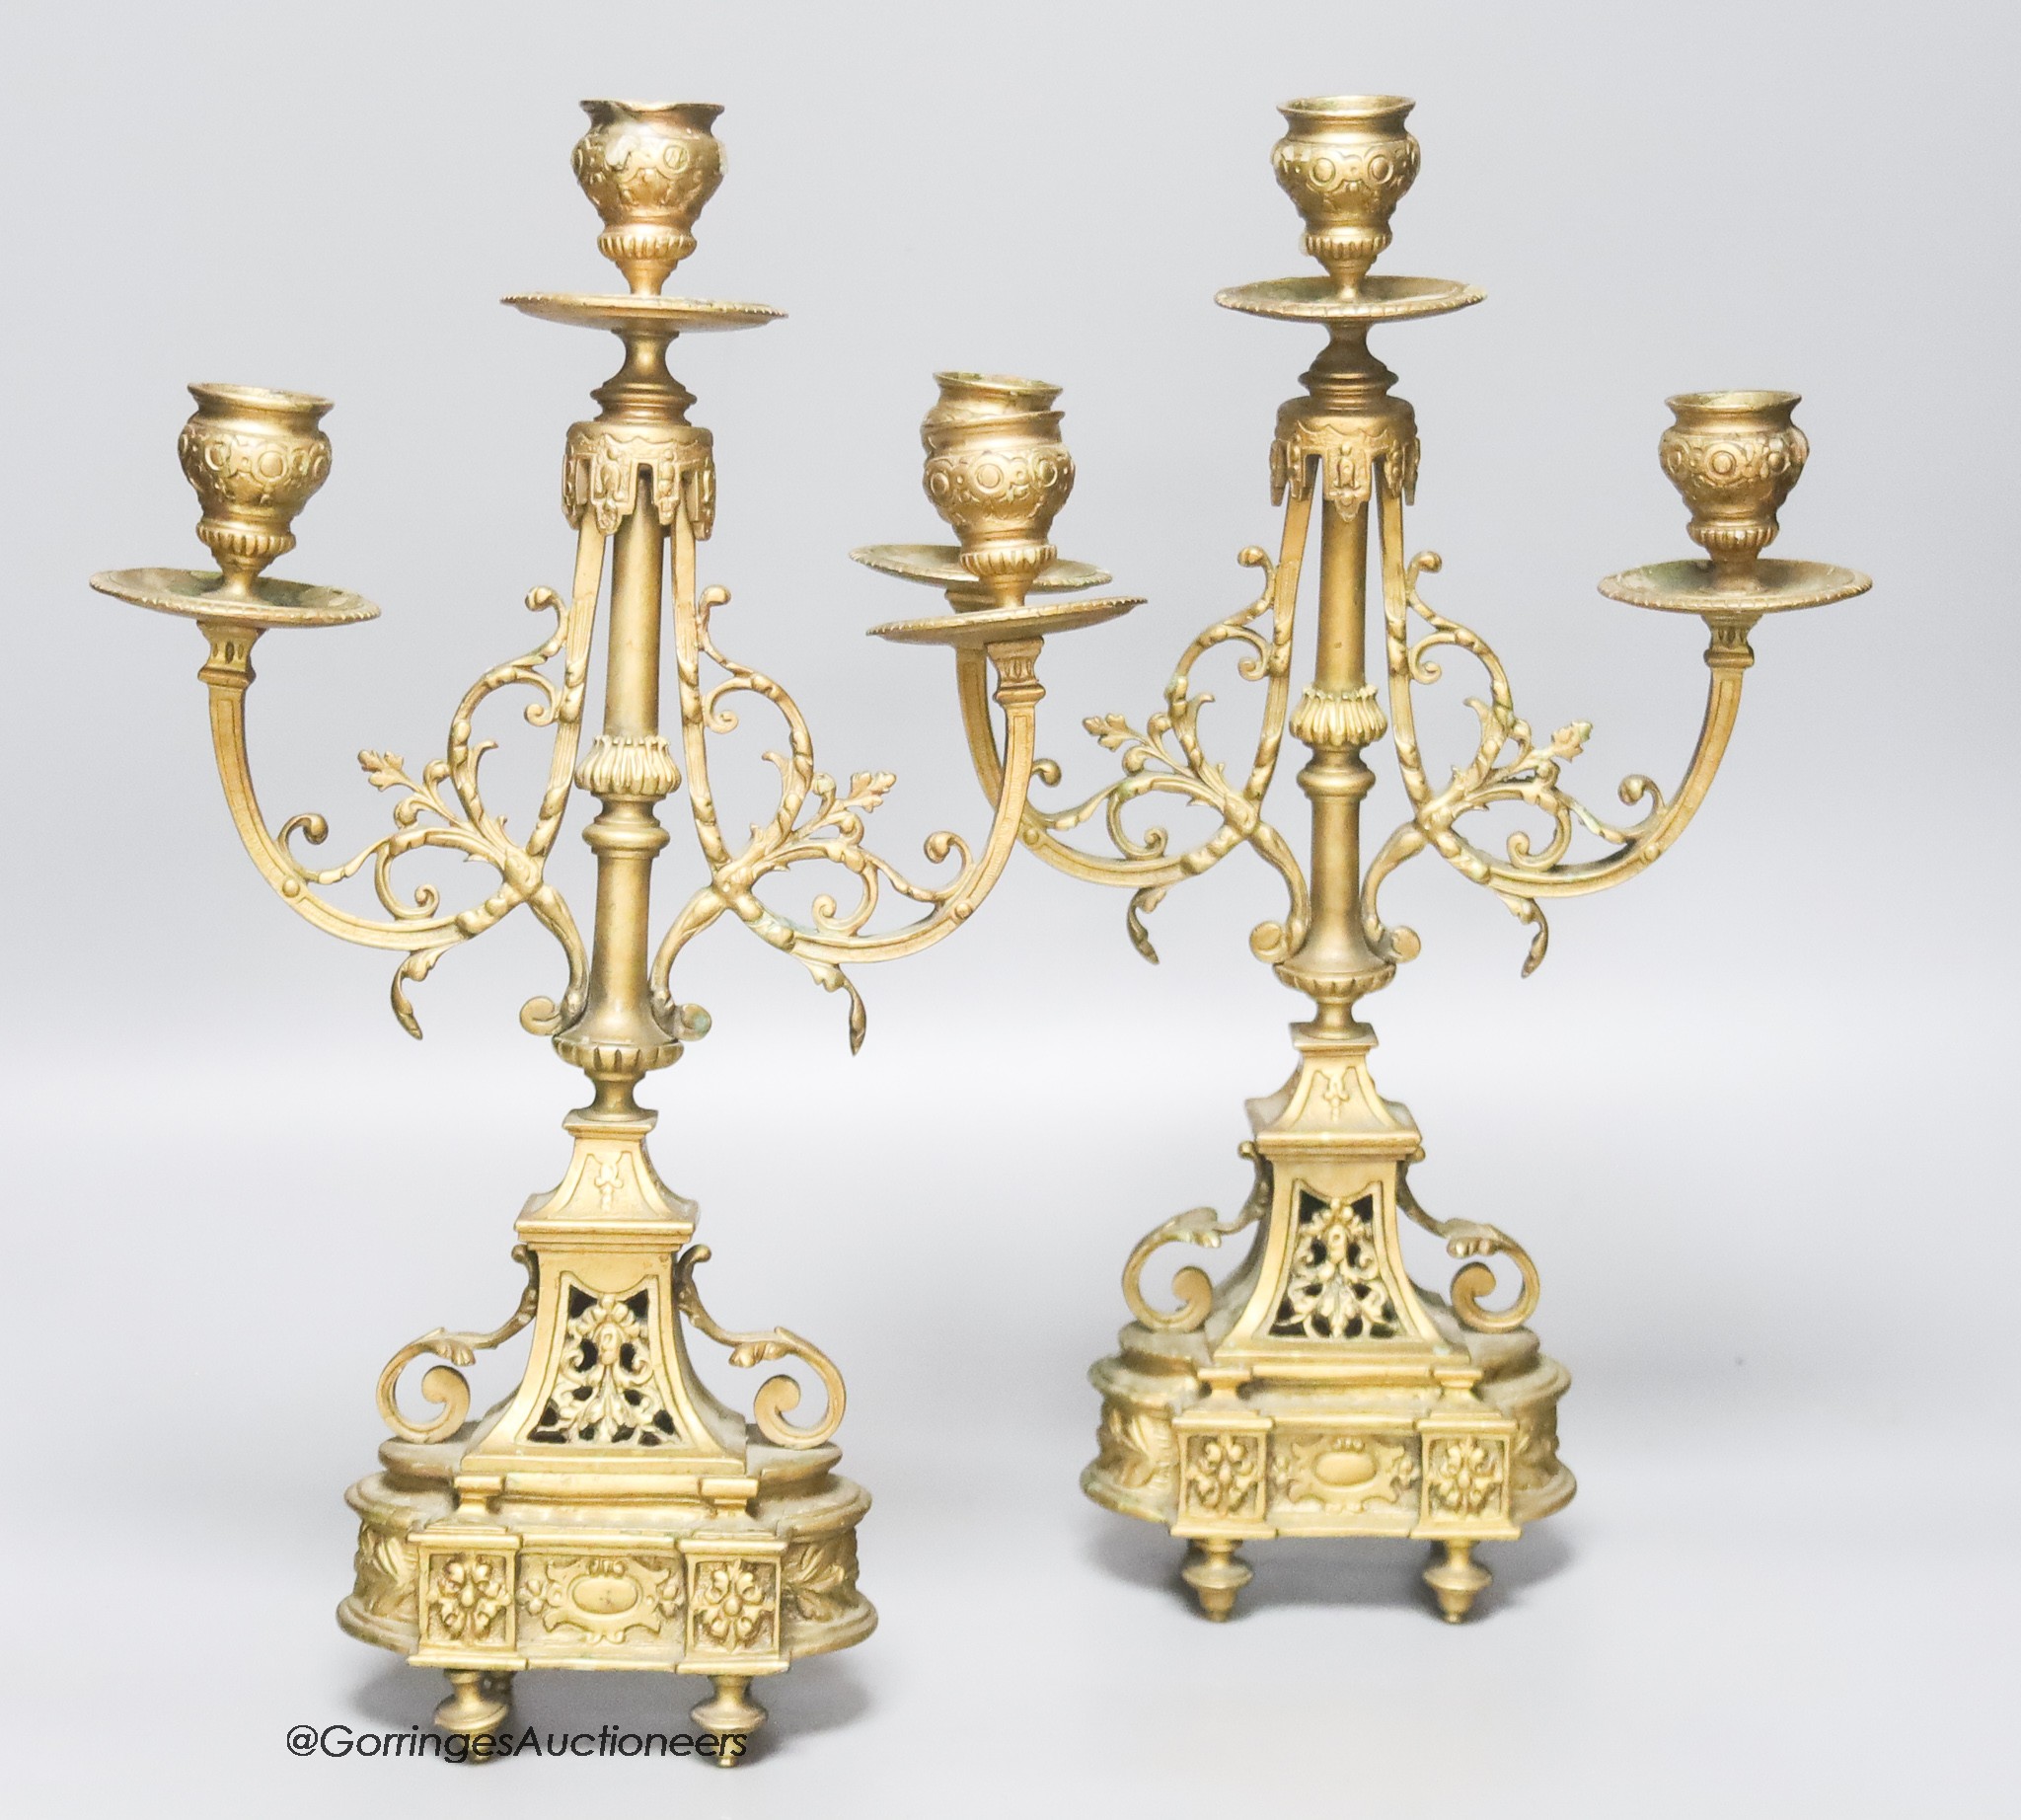 A pair of 19th century French ormolu candelabra, height 34cm